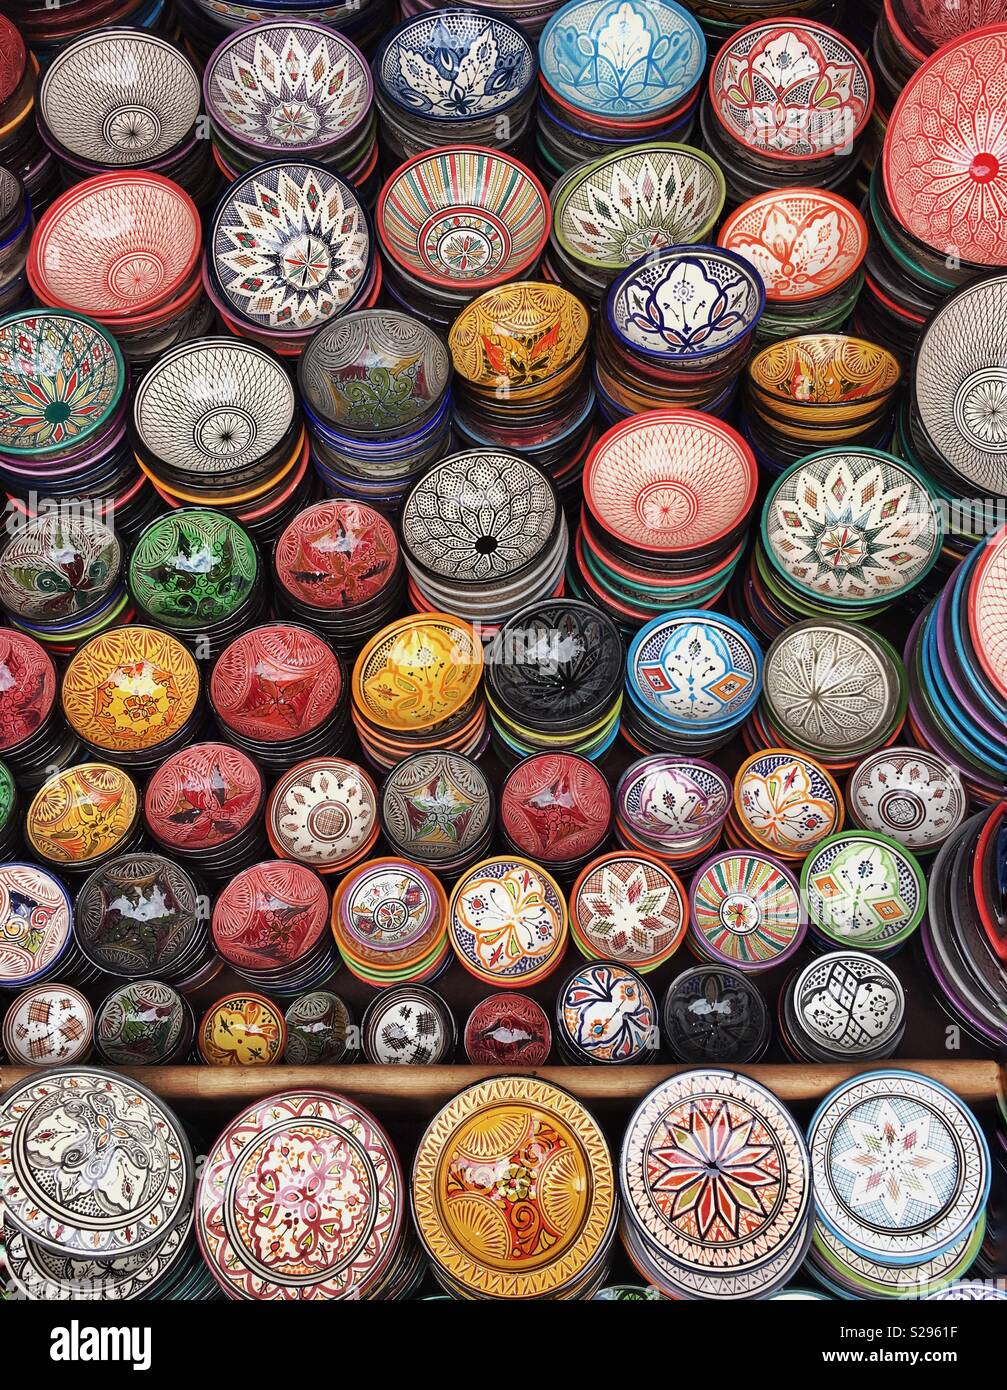 Bowls and plates in Marrakesh Stock Photo